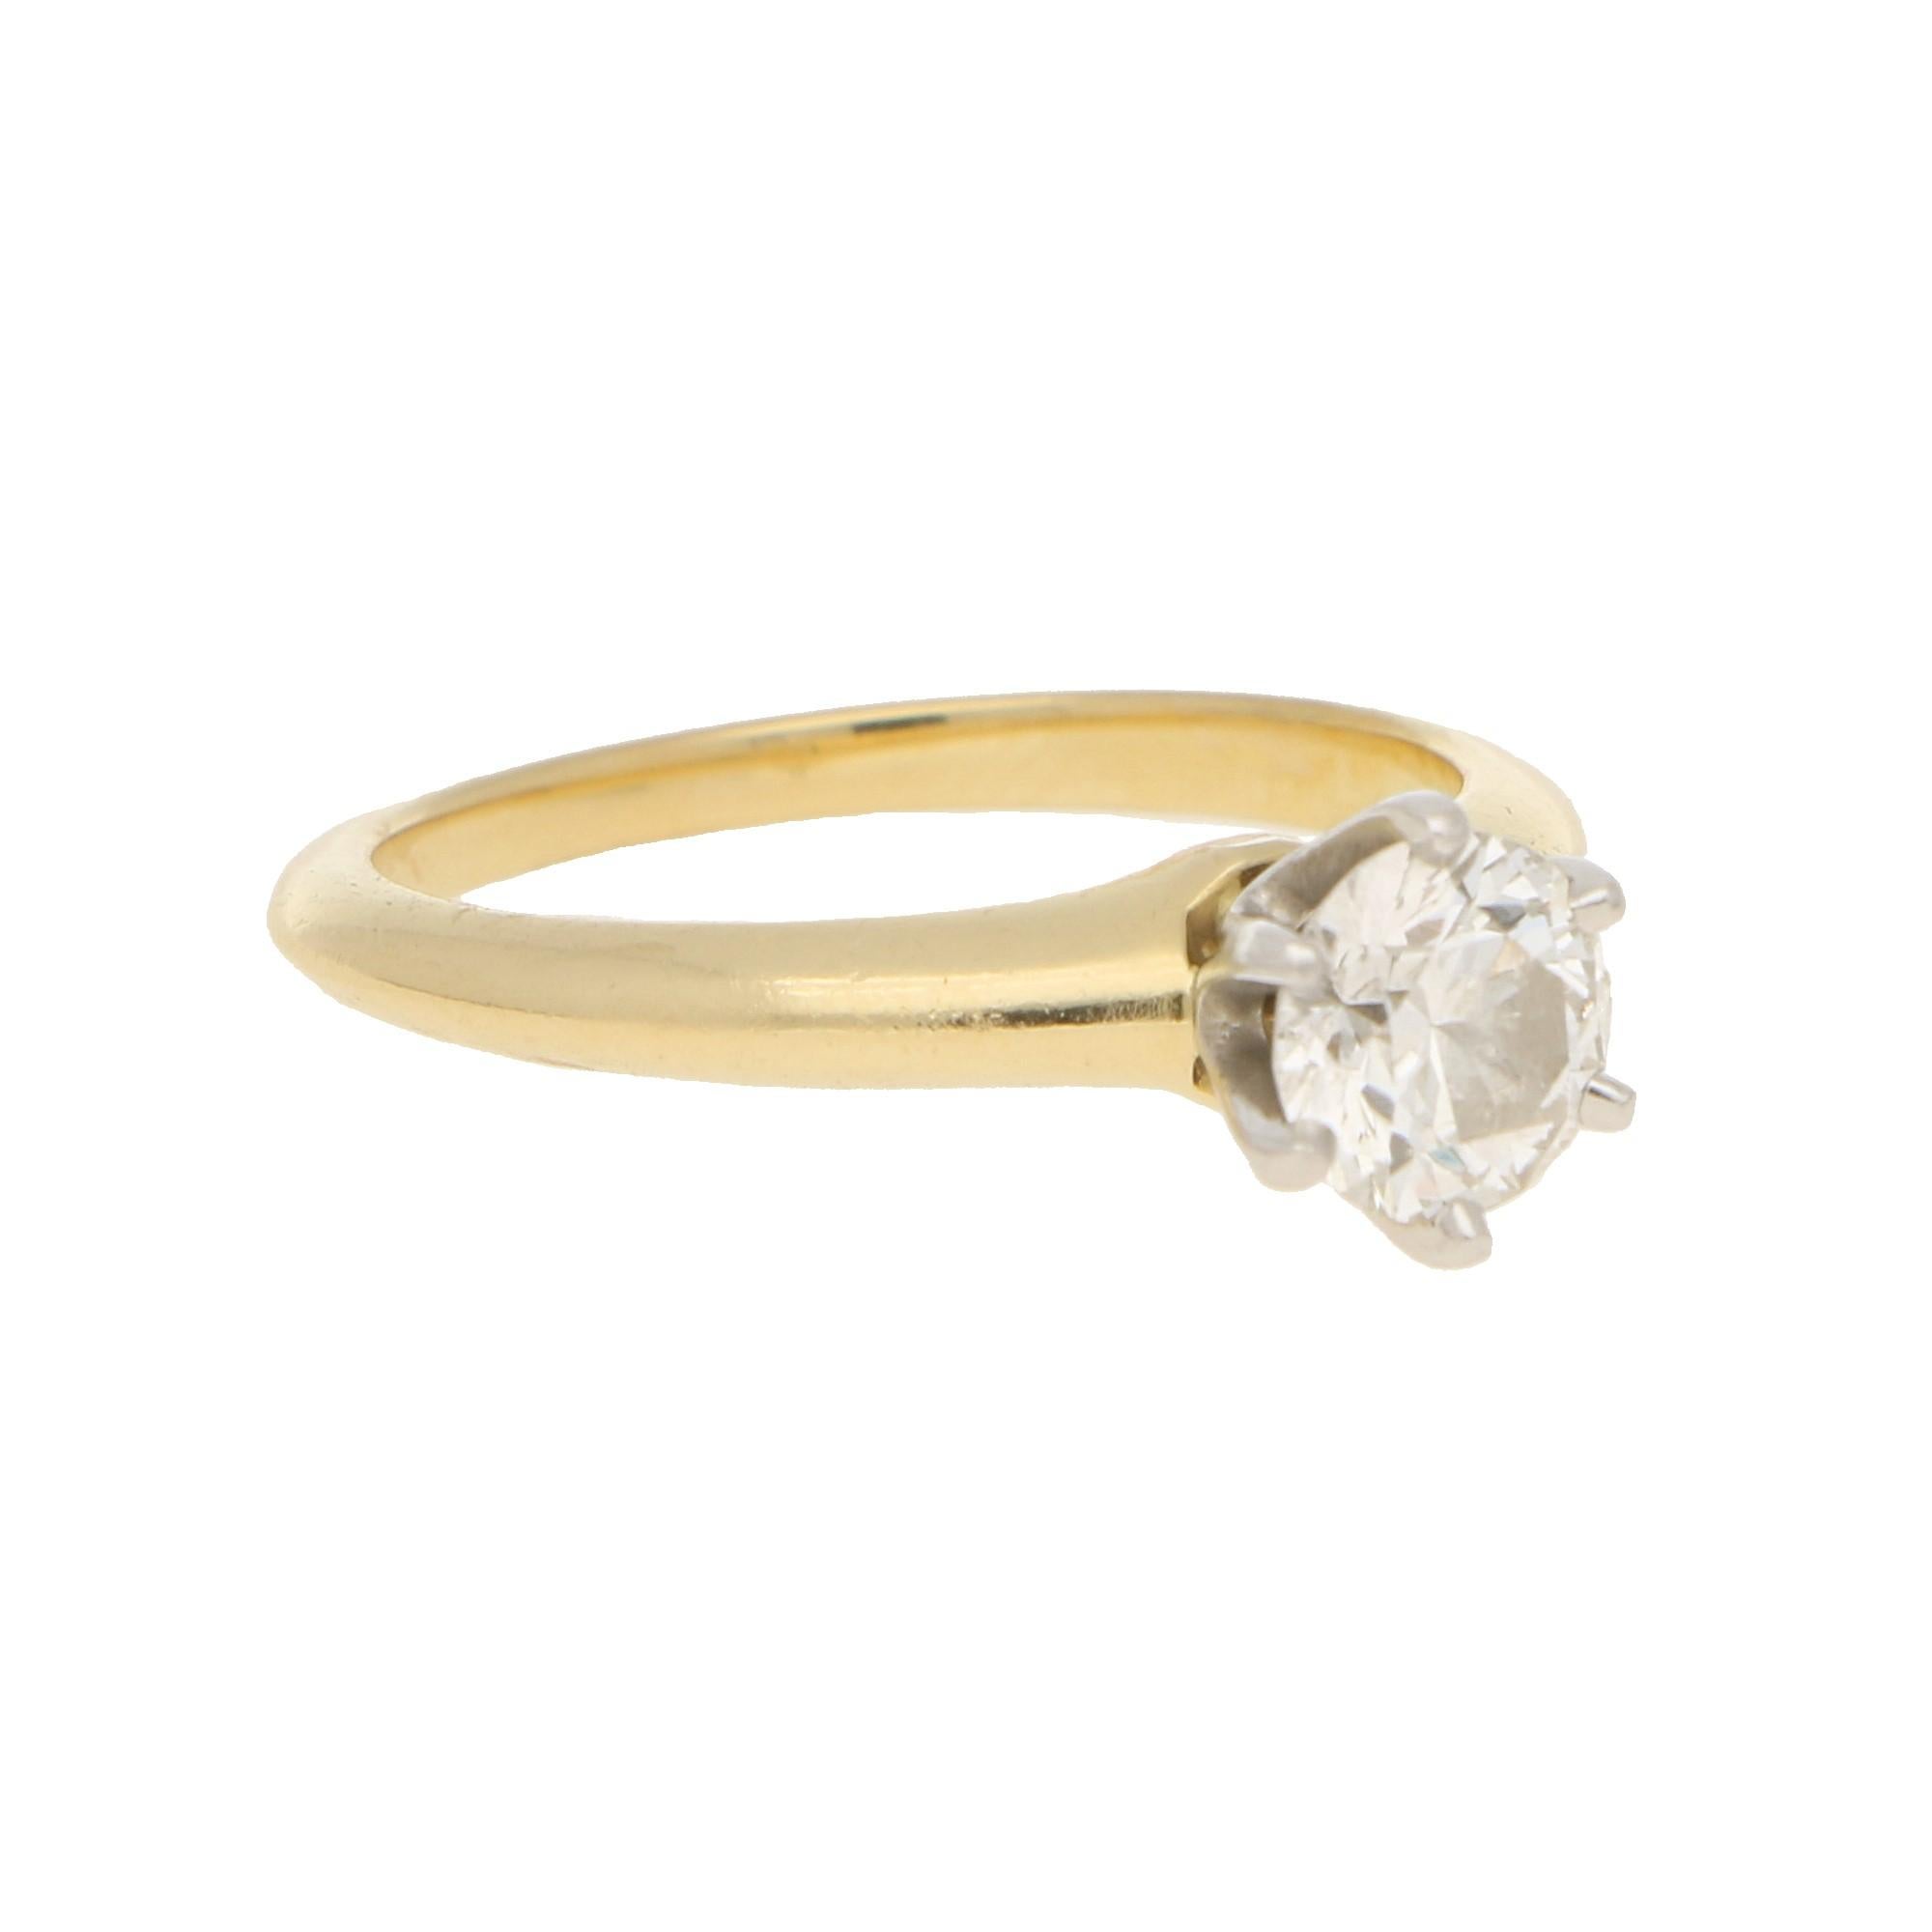 Women's or Men's Tiffany & Co Solitaire Diamond Ring in 18ct Yellow Gold 0.86 Carat